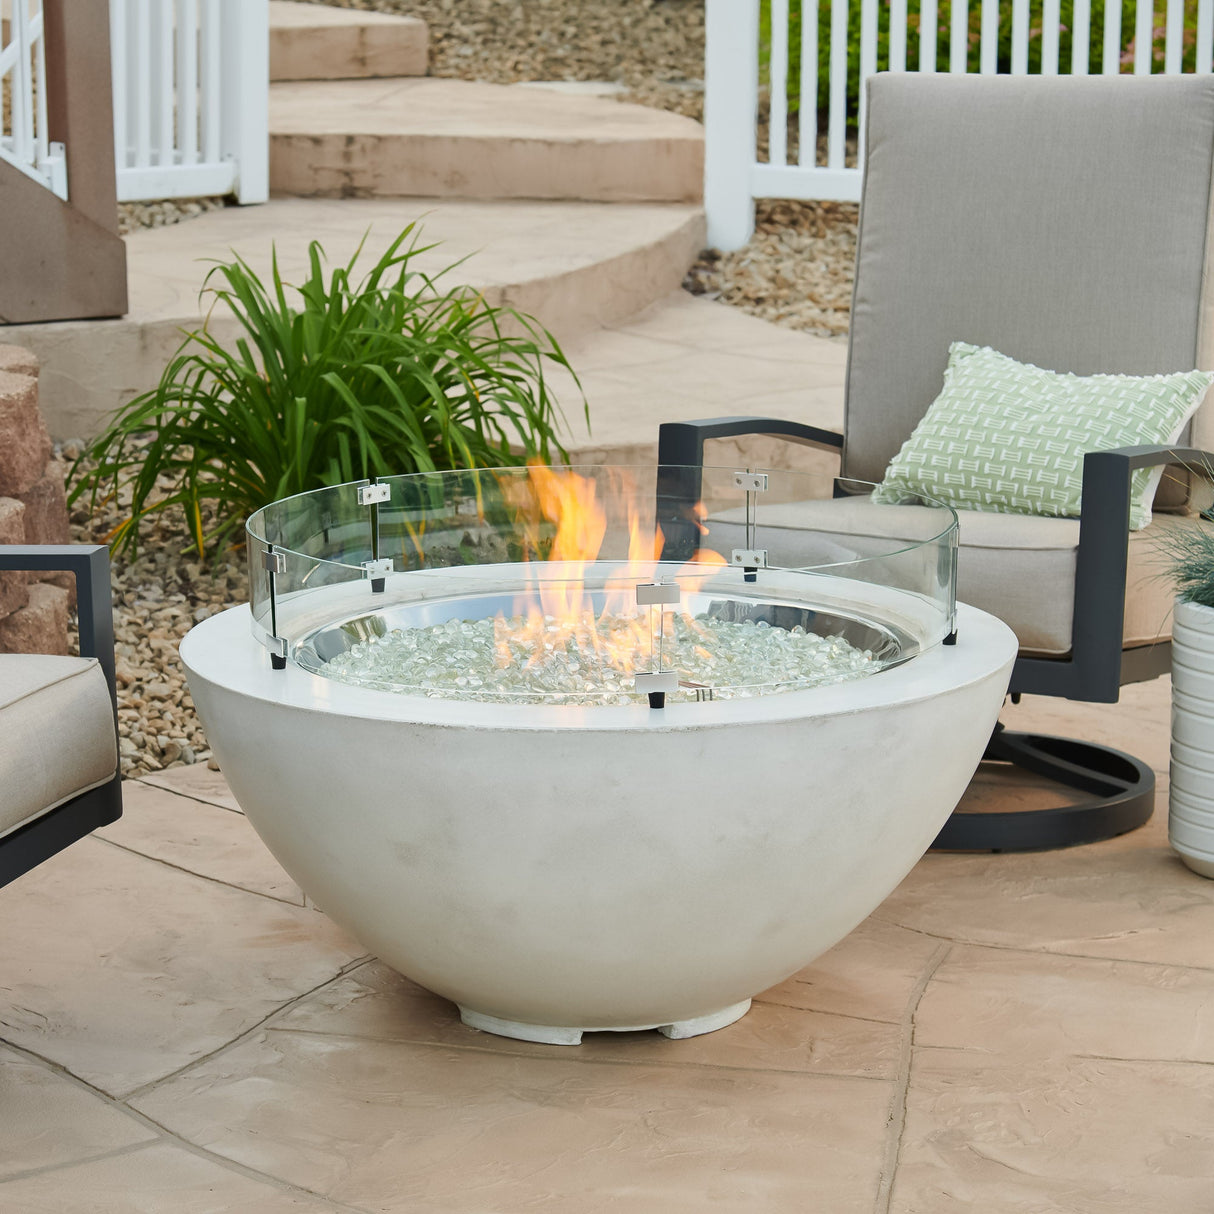 A glass wind guard on a White Cove Round Gas Fire Pit Bowl 42" while it is operating outside